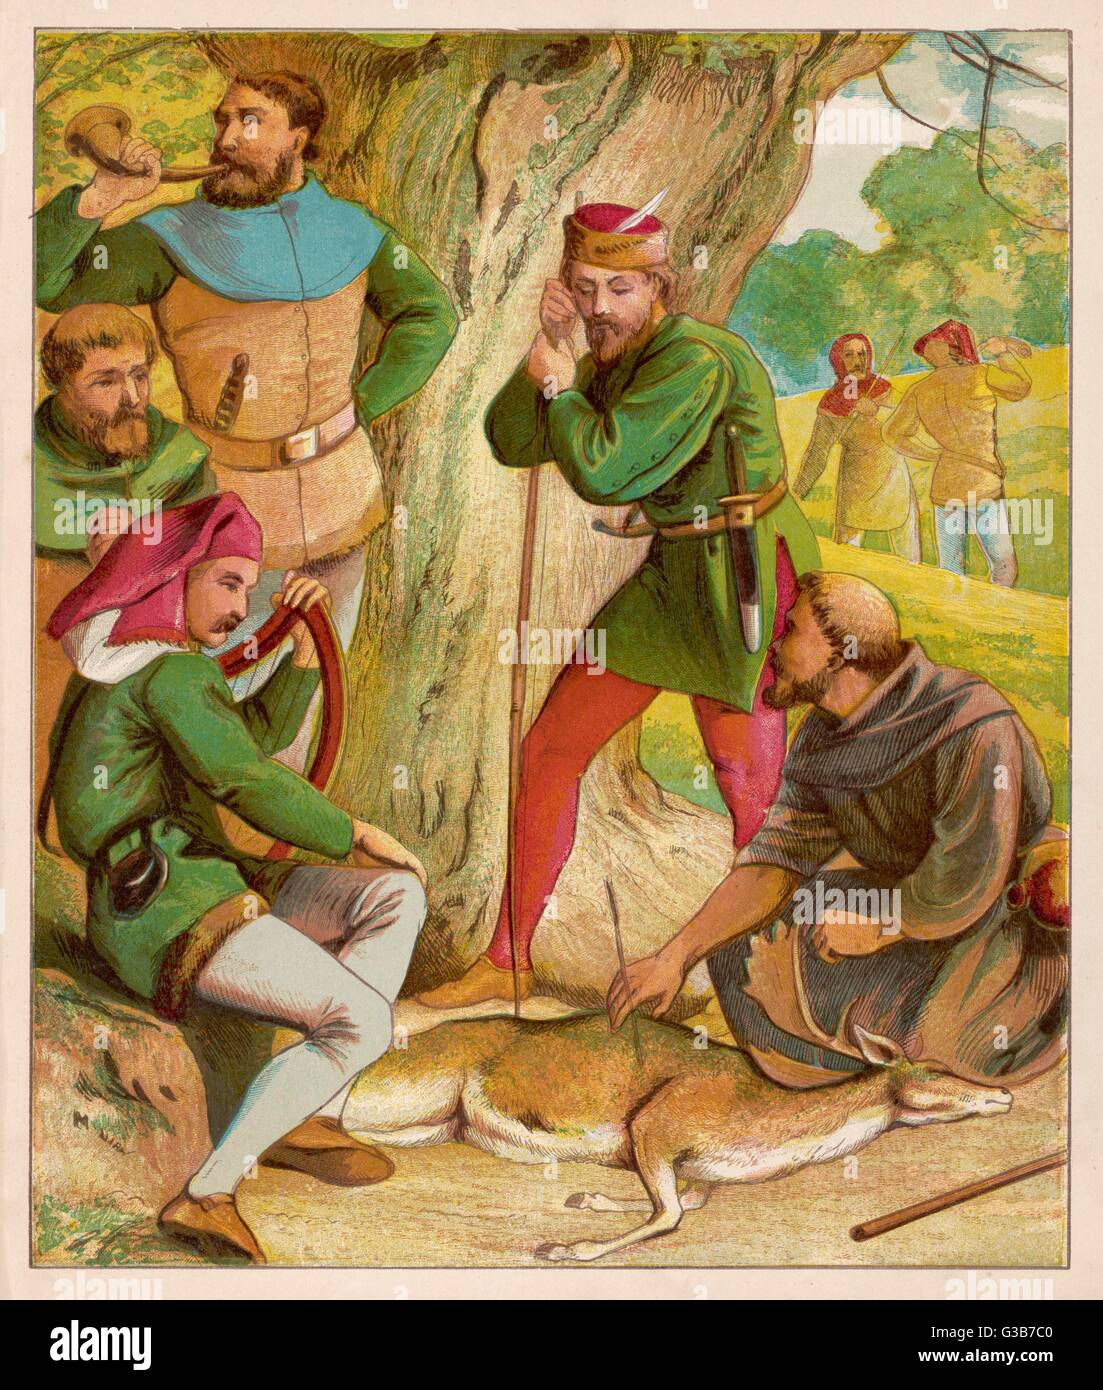 Robin &amp; his Merry Men hunting  in Sherwood forest         Date: circa 1860 Stock Photo